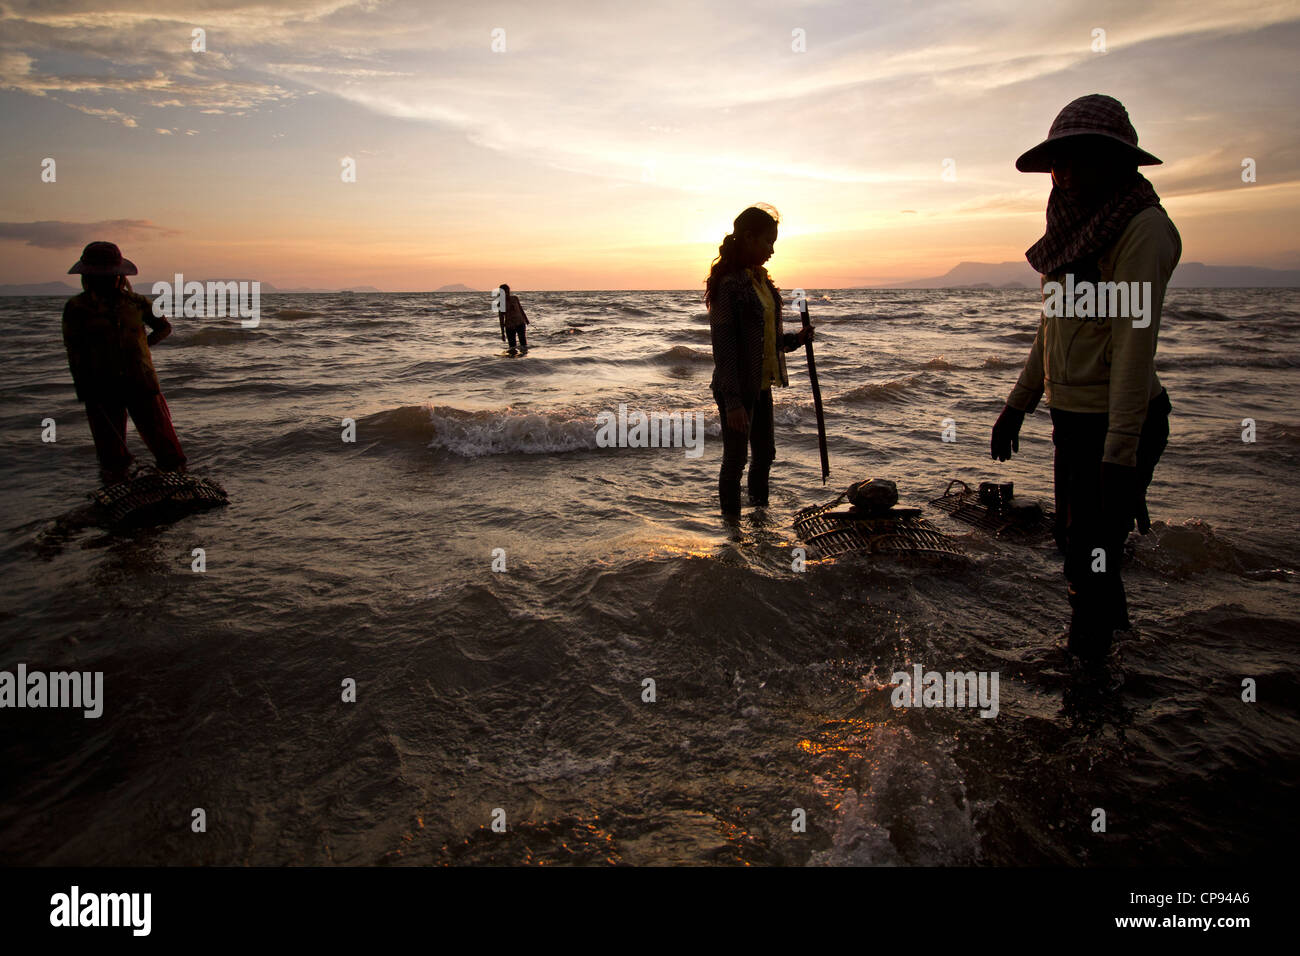 Female crab sellers stand in the water in Kep, Cambodia, with the sun setting behind them over the Gulf of Thailand Stock Photo